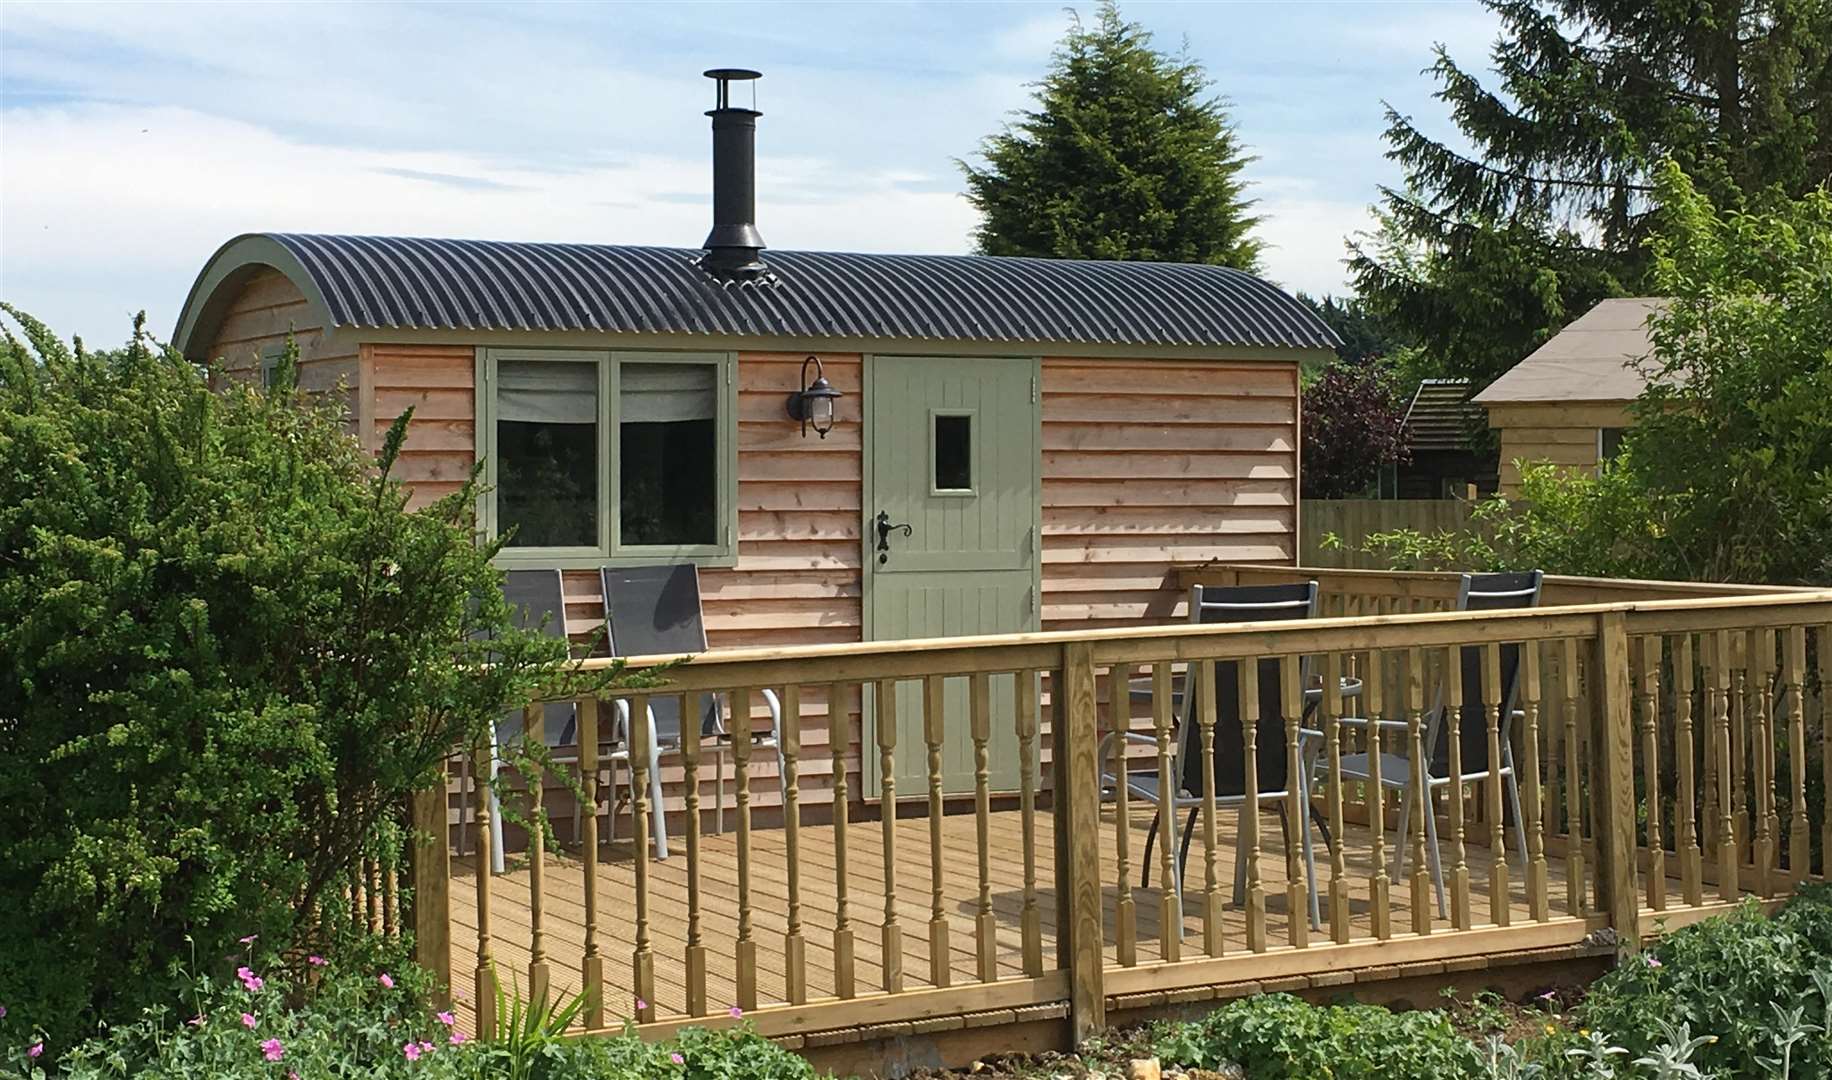 The Shepherds Hut is in Challock and can be booked with Airbnb